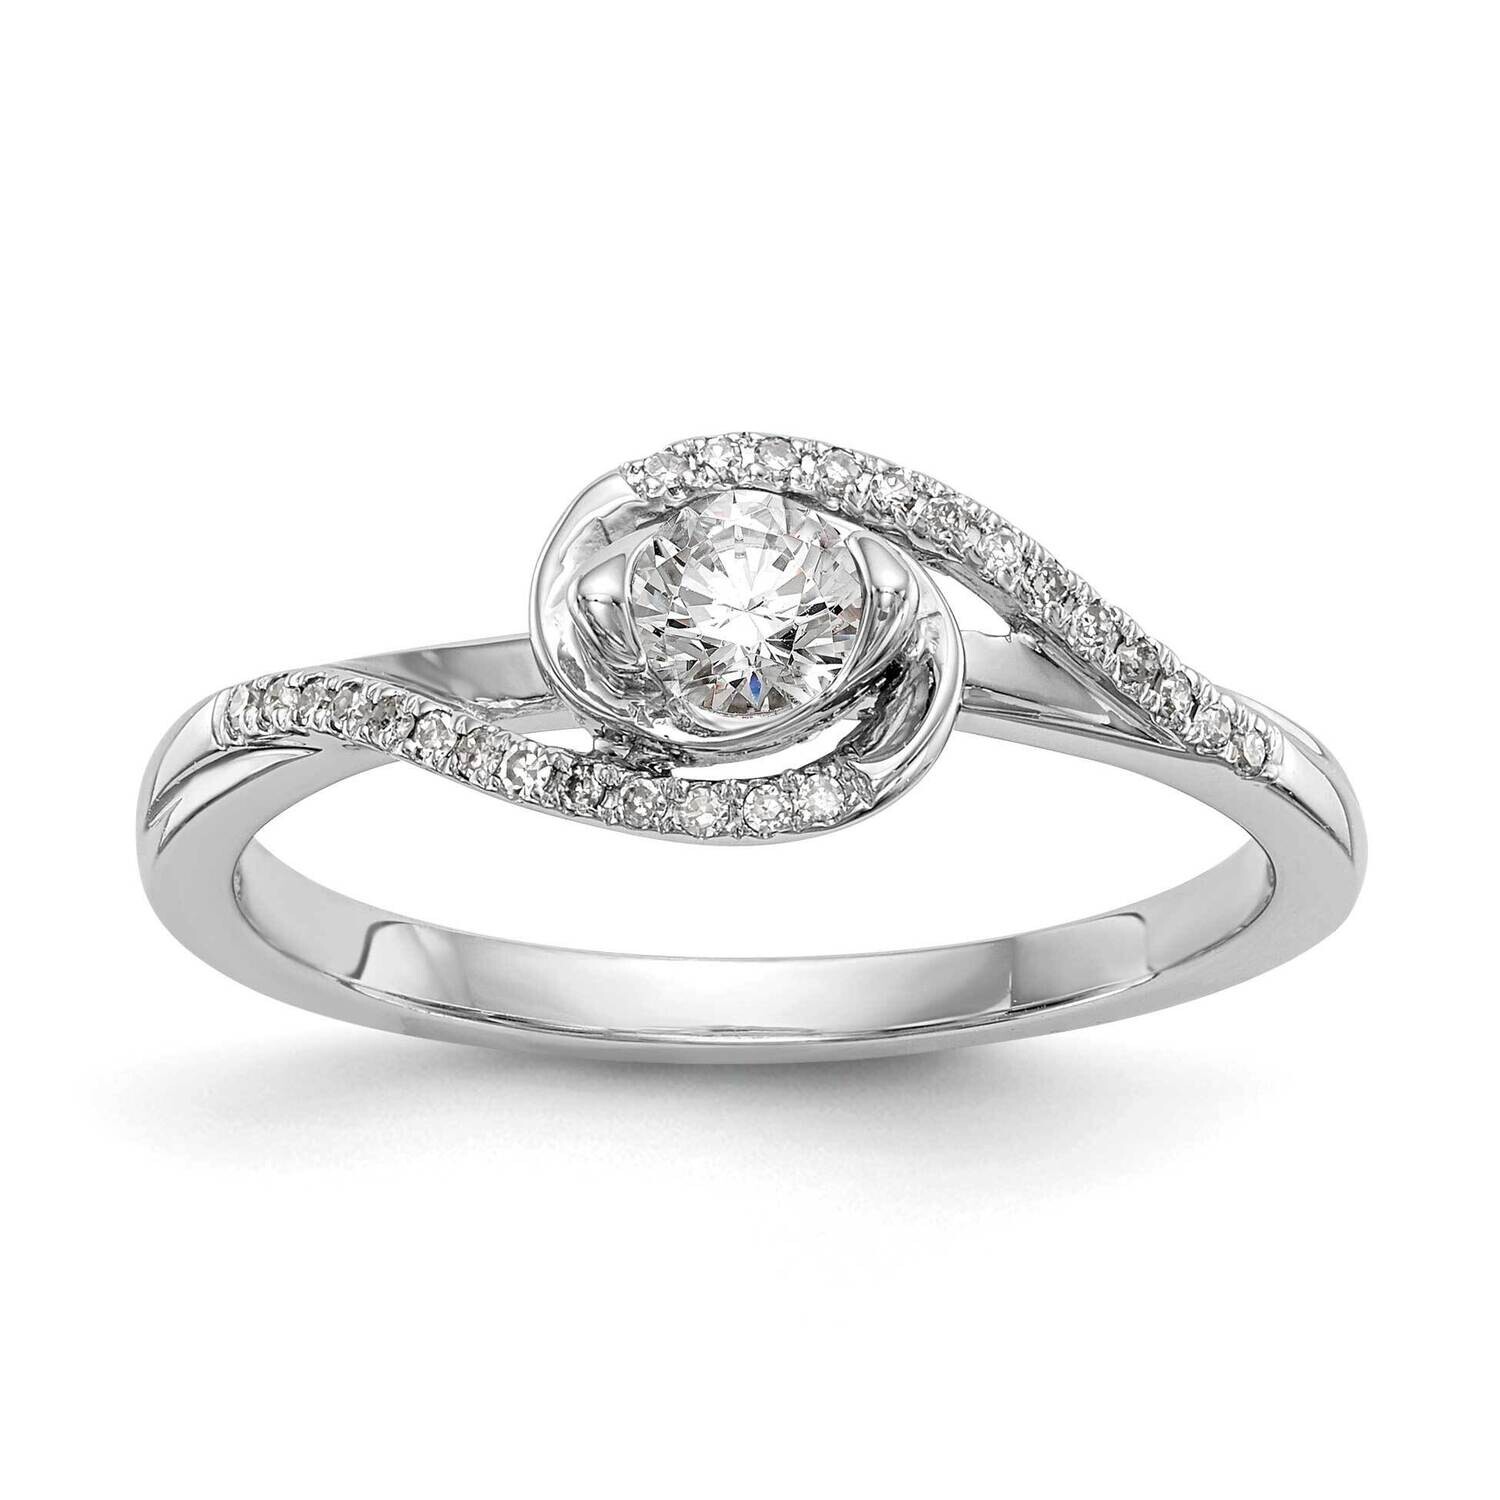 By-Pass Holds 1/6 Carat 3.6mm Round Center 1/15 Carat Diamond Semi-Mount Engagement Ring 14k White Gold RM2417E-017-WAA